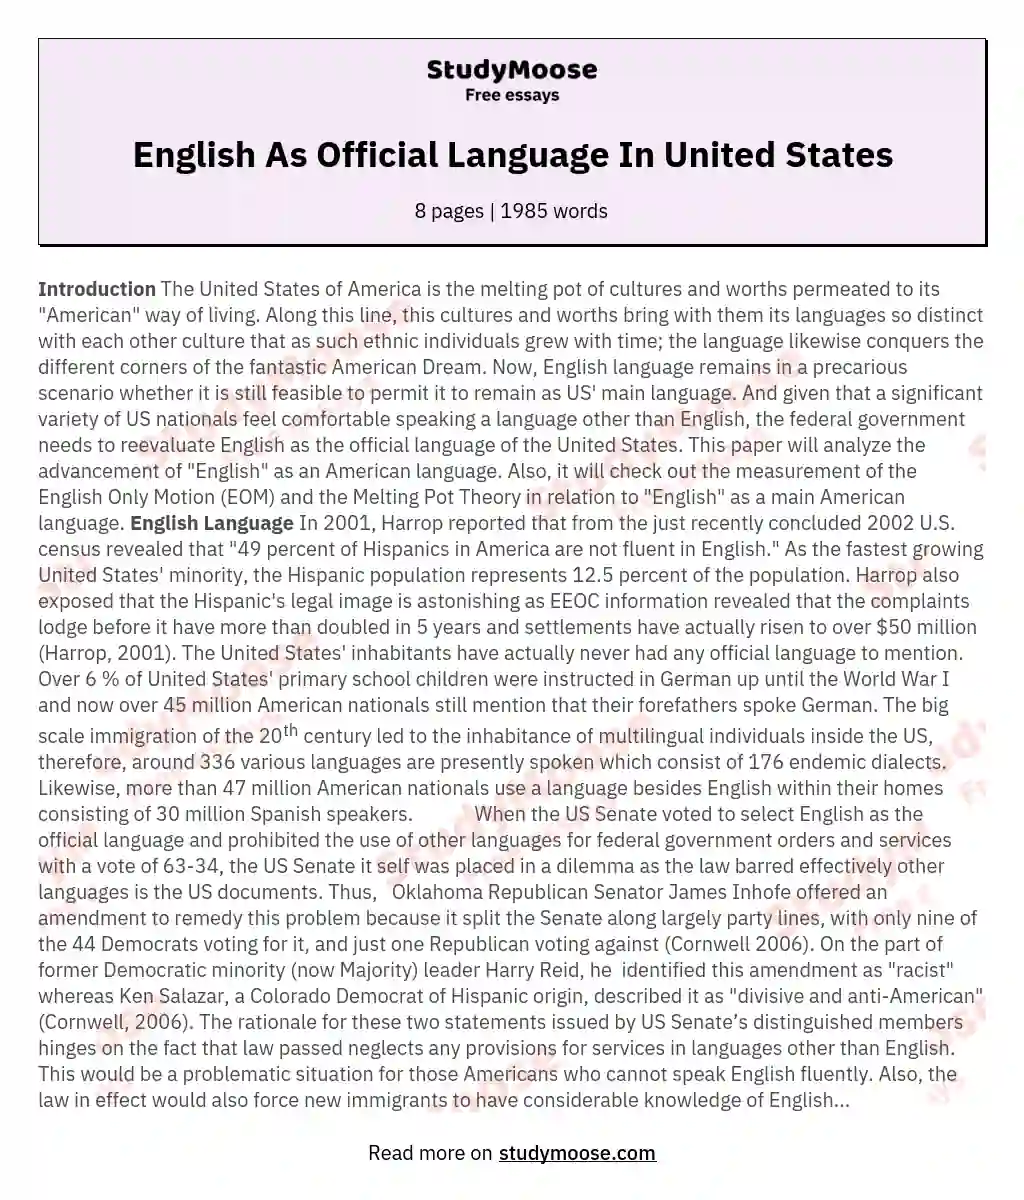 English As Official Language In United States essay